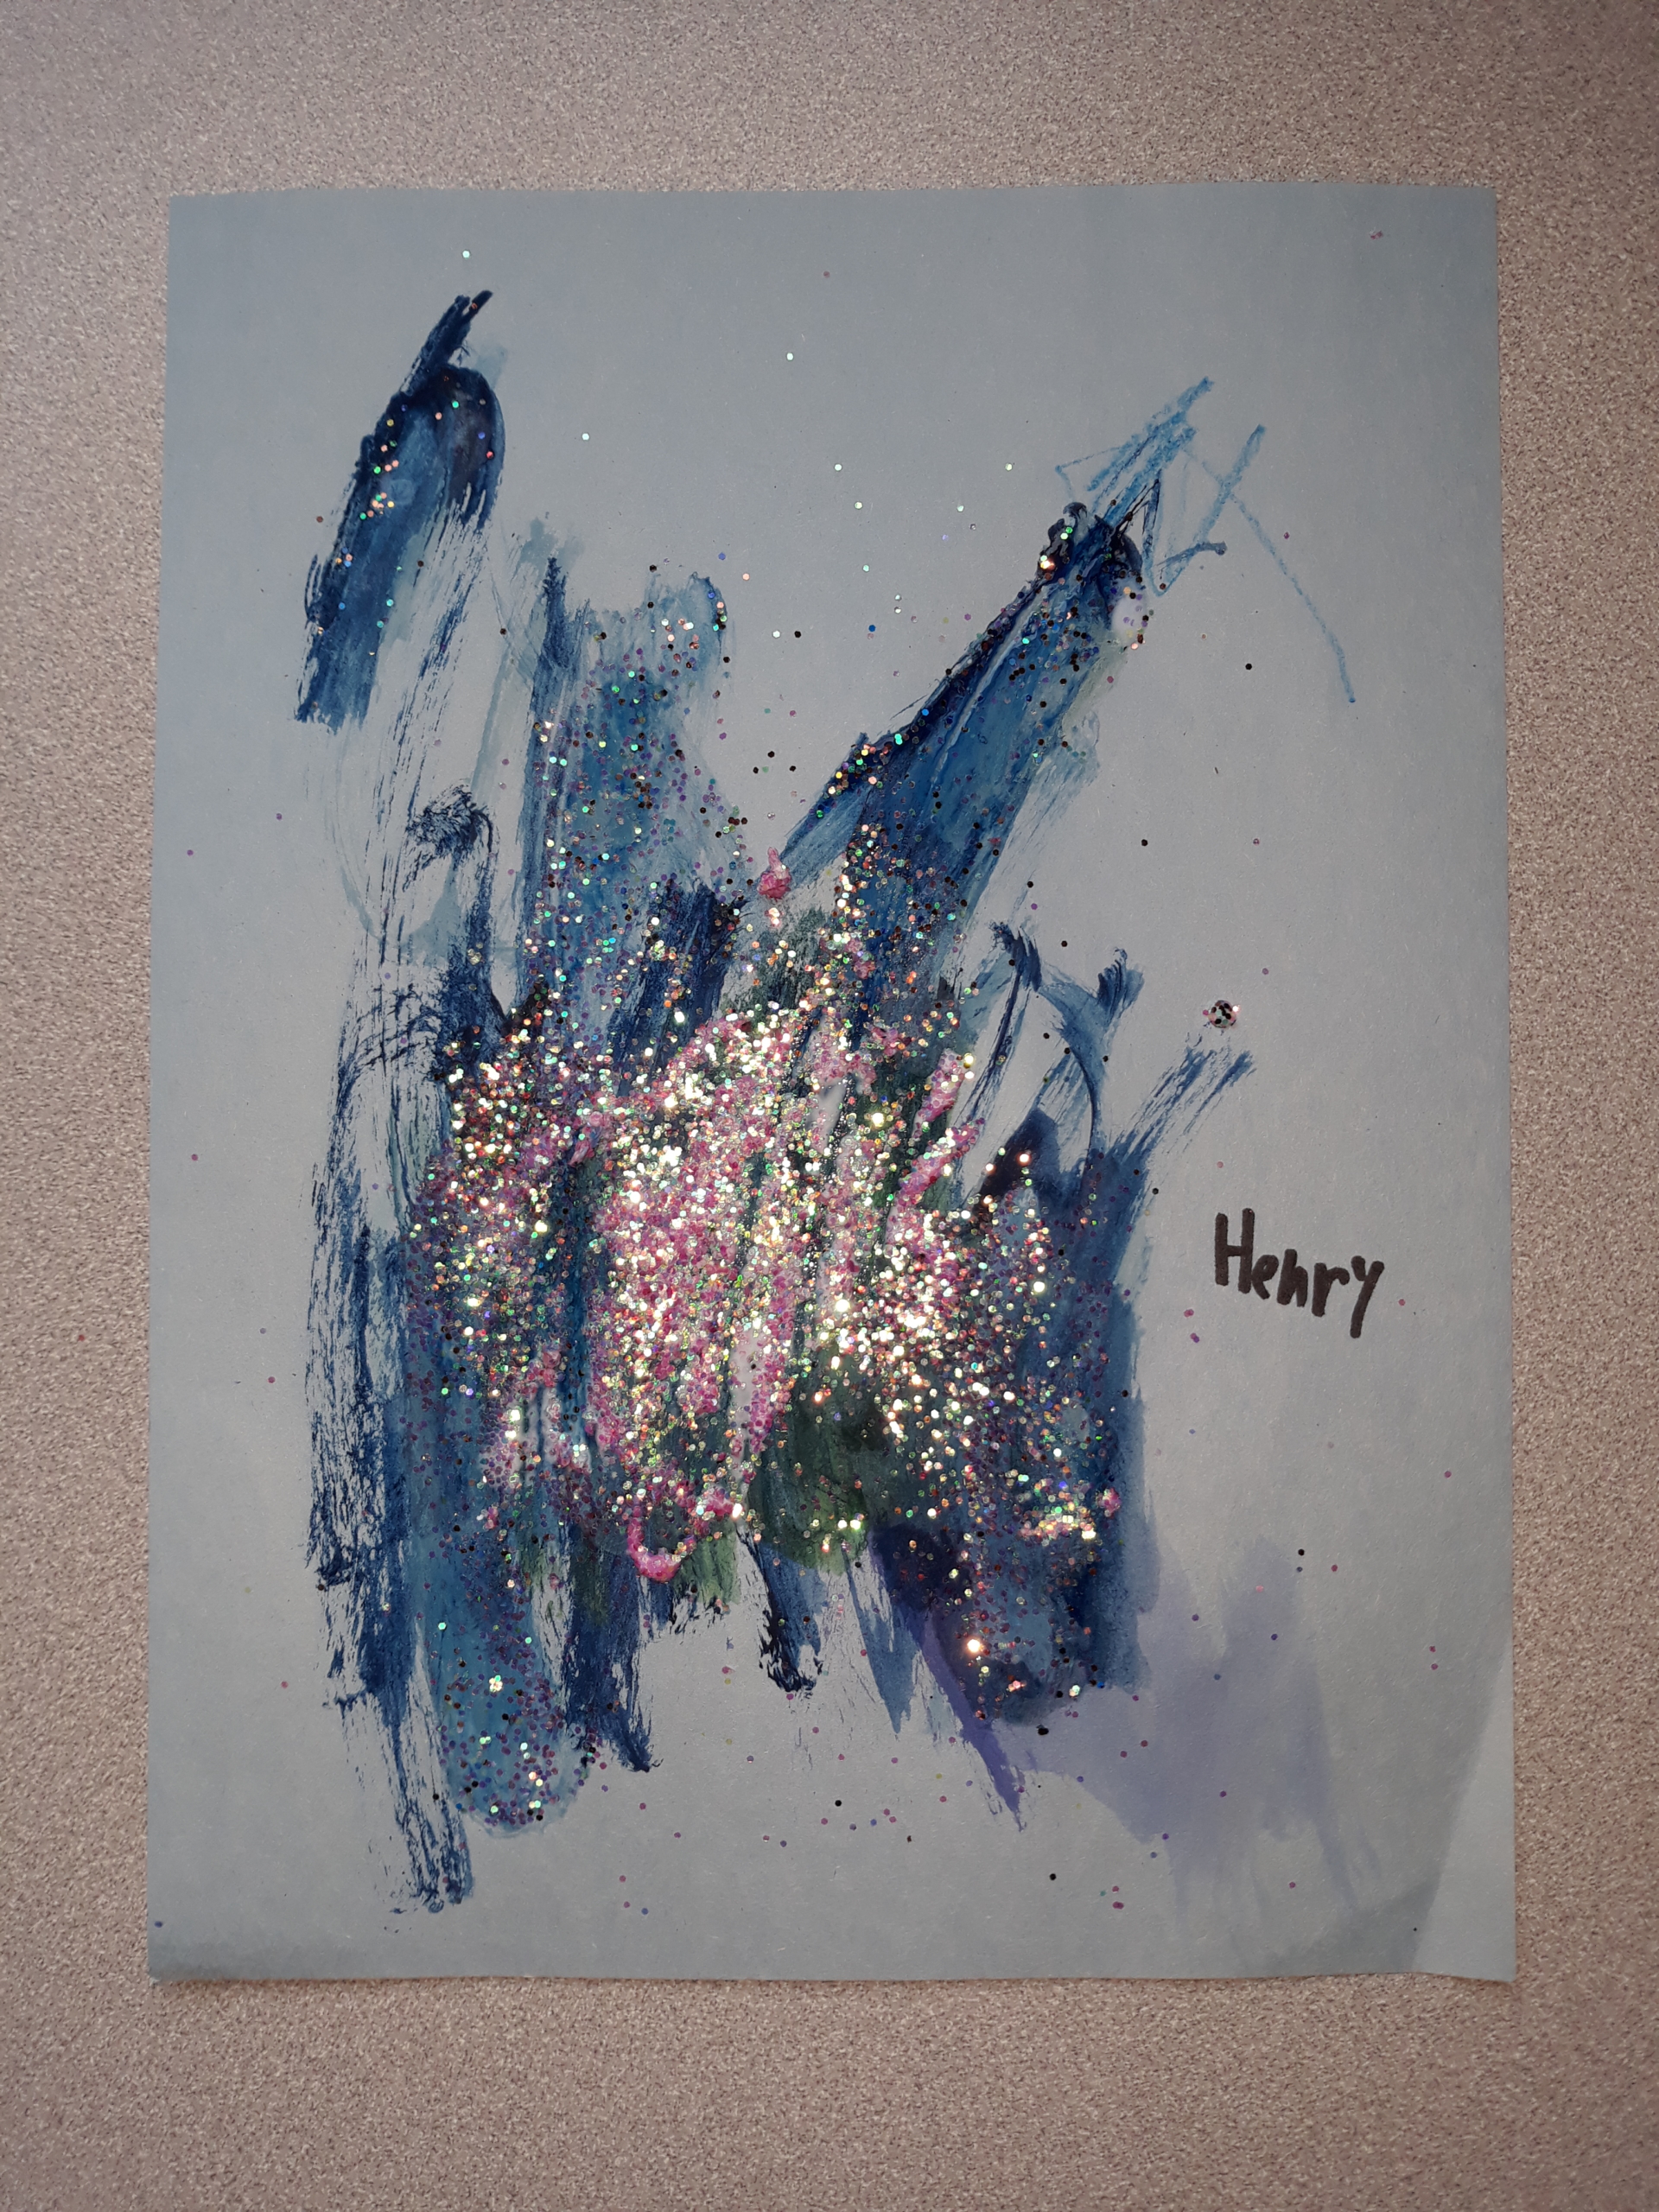 An explosion of blue and glitter fill the Space Collage of one workshop participant.